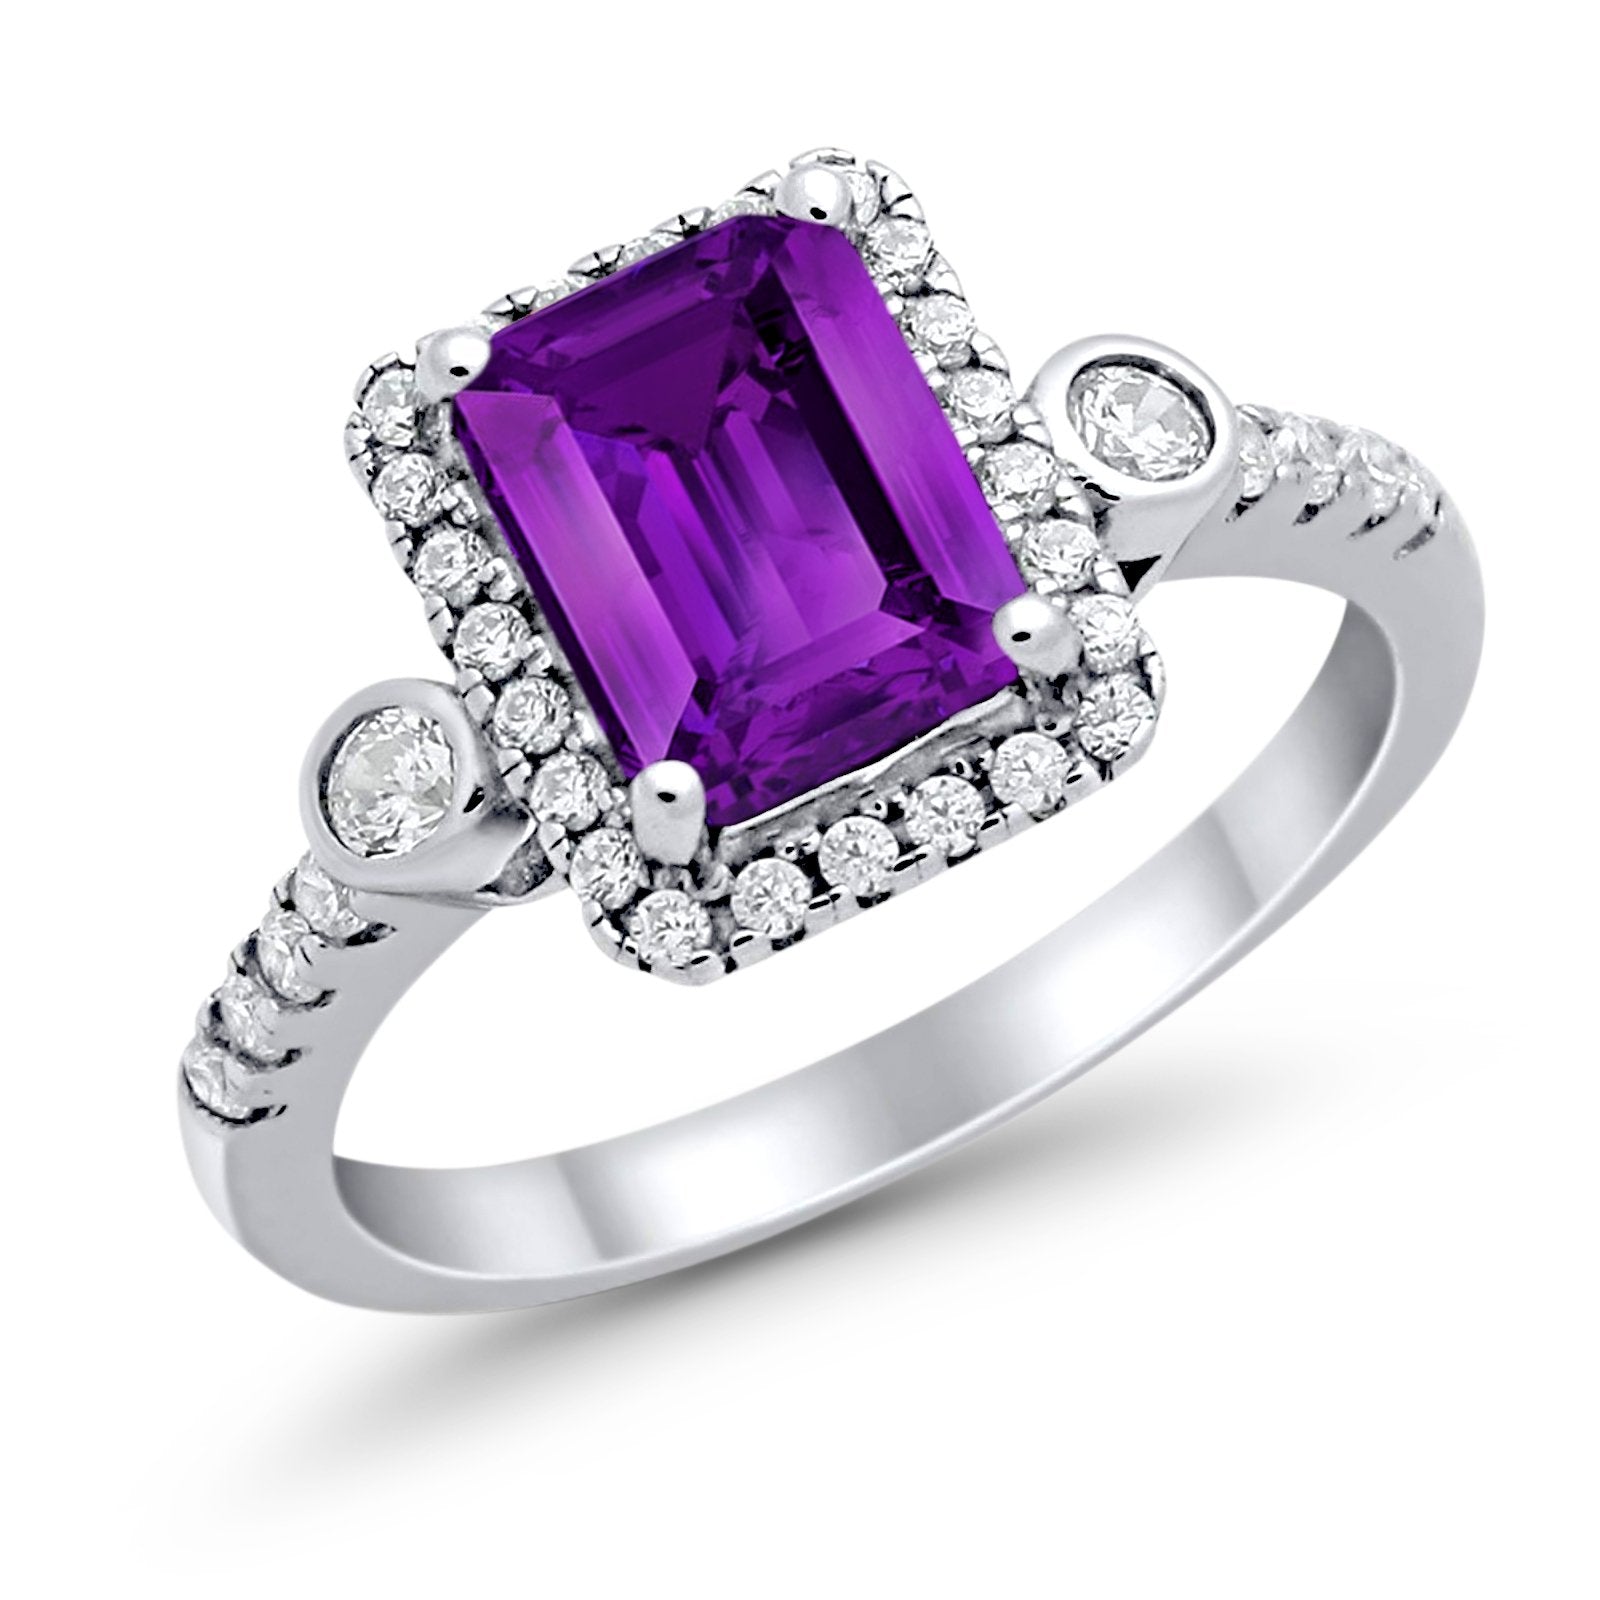 Halo Weddding Bridal Promise Ring Simulated Amethyst CZ 925 Sterling Silver